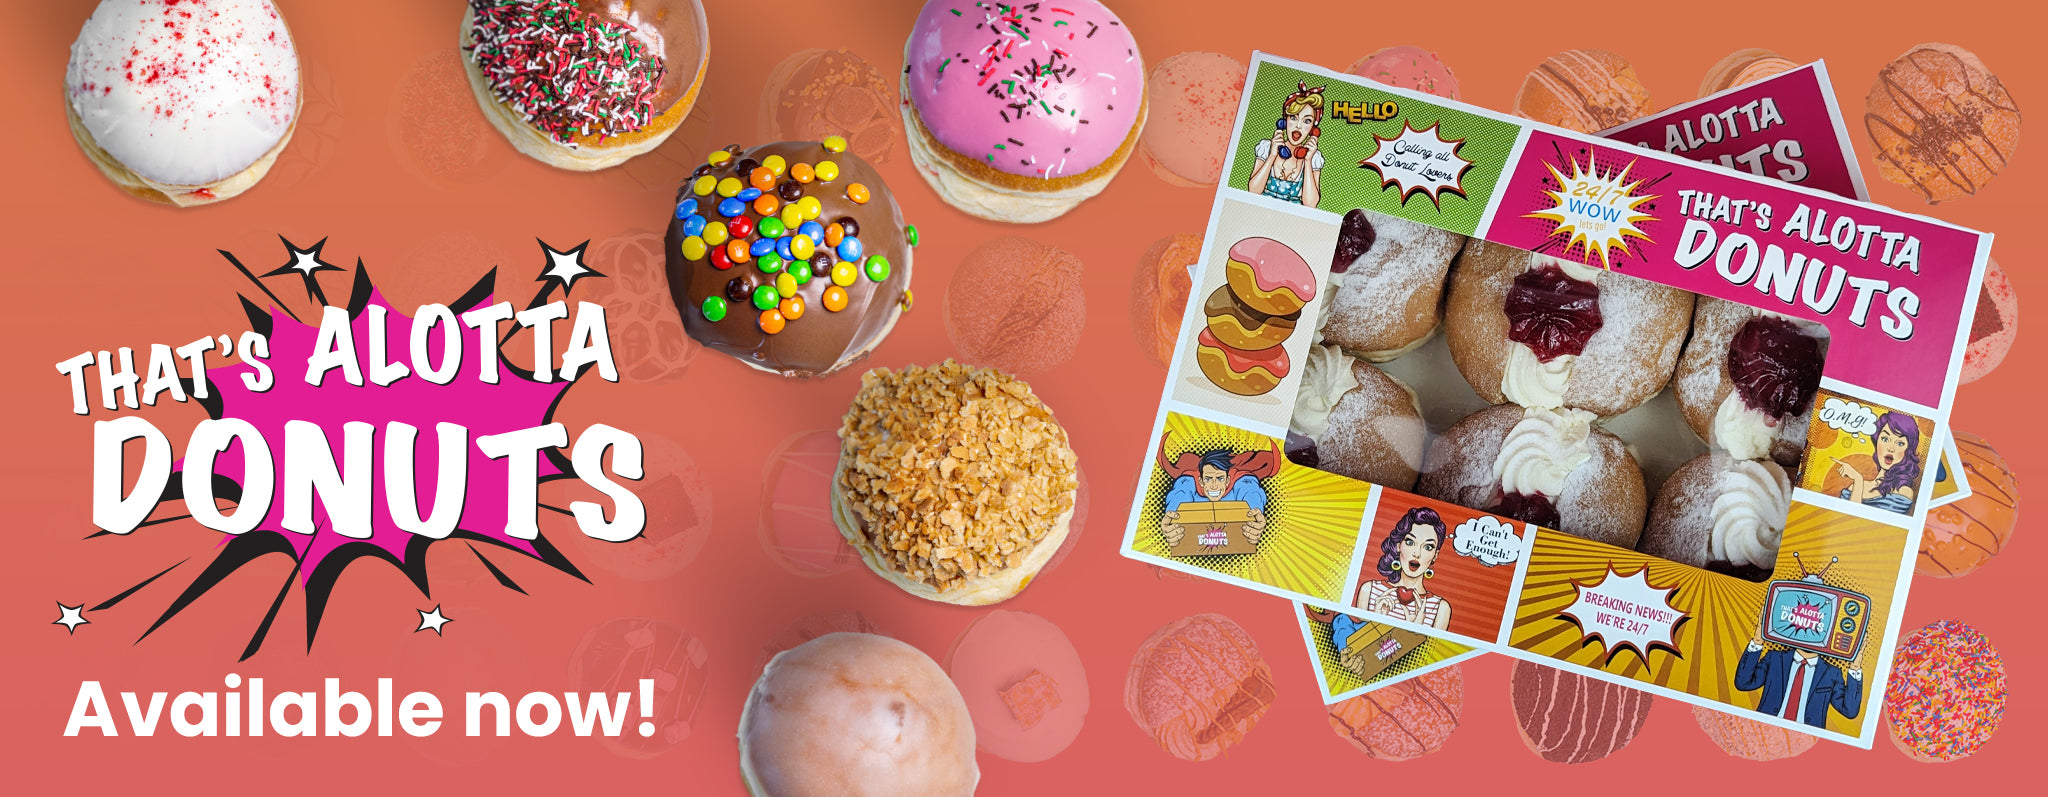 That's Alotta Donuts - Landing Page